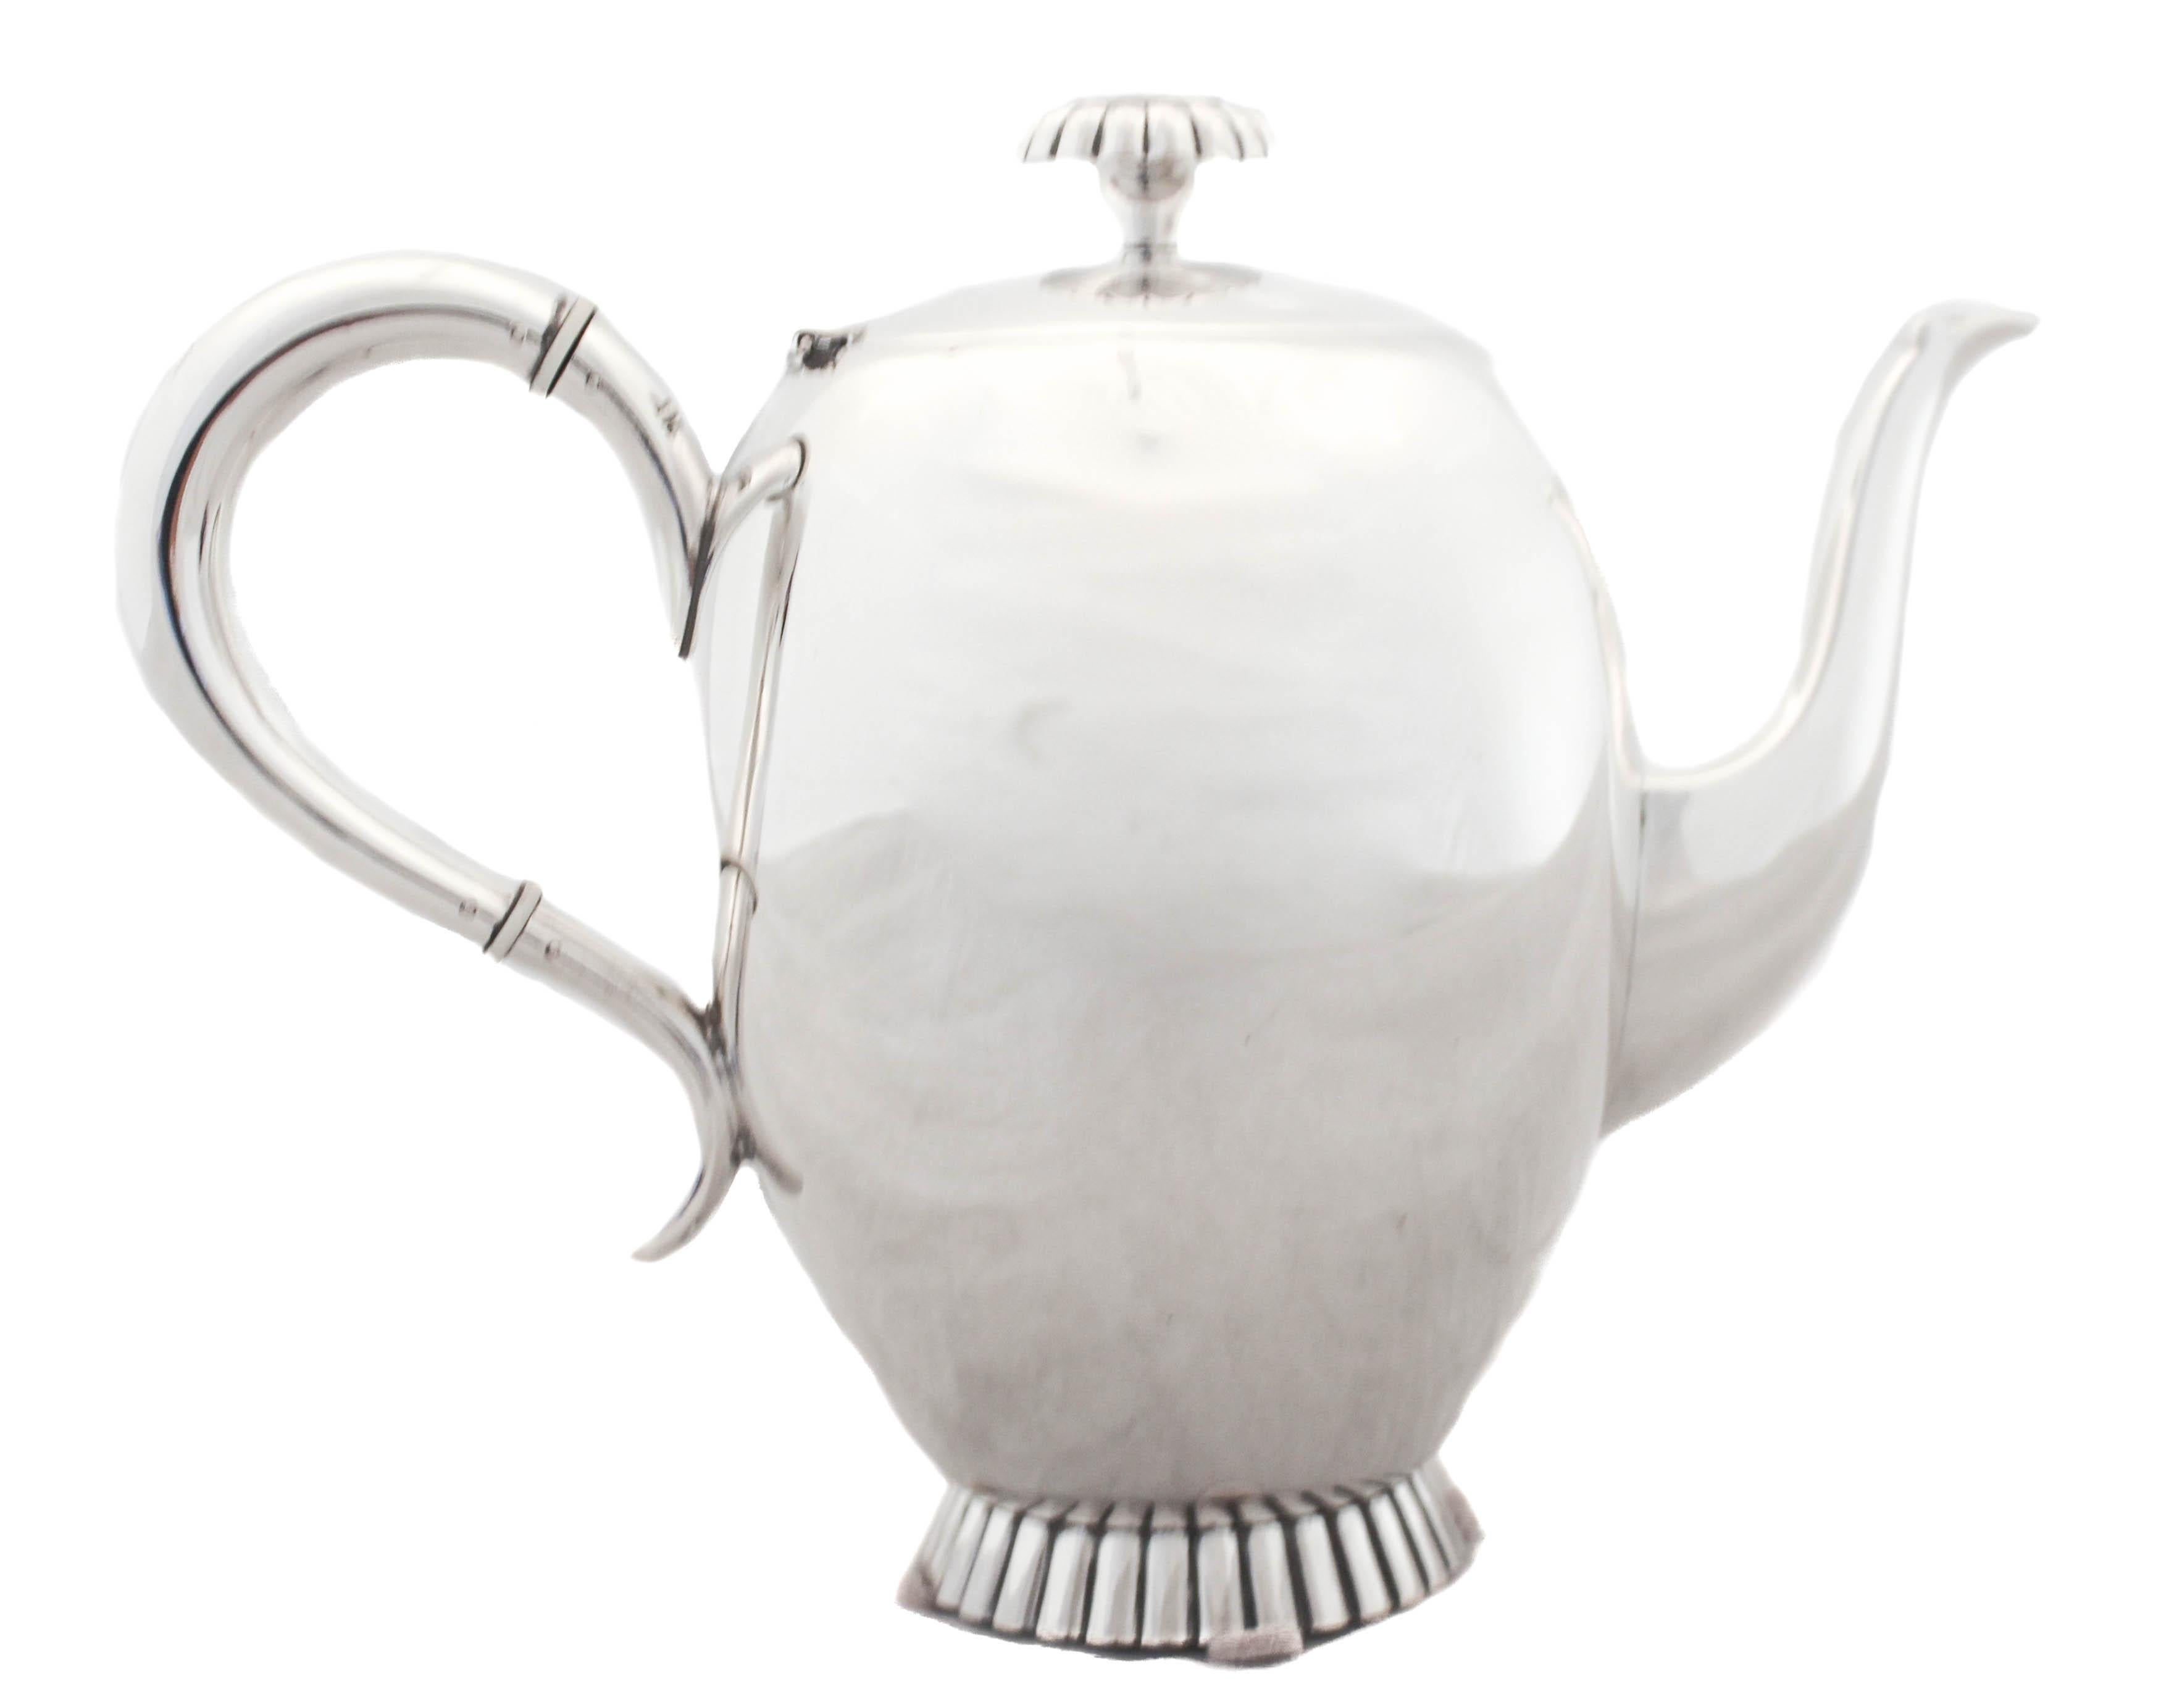 We are just gaga over this sterling silver Art Deco tea set!! It has an understated elegance that is so chic. Bauhaus design is often abstract, angular and/or geometric, with little ornamentation. 
From the beginning, it was clear that Bauhaus